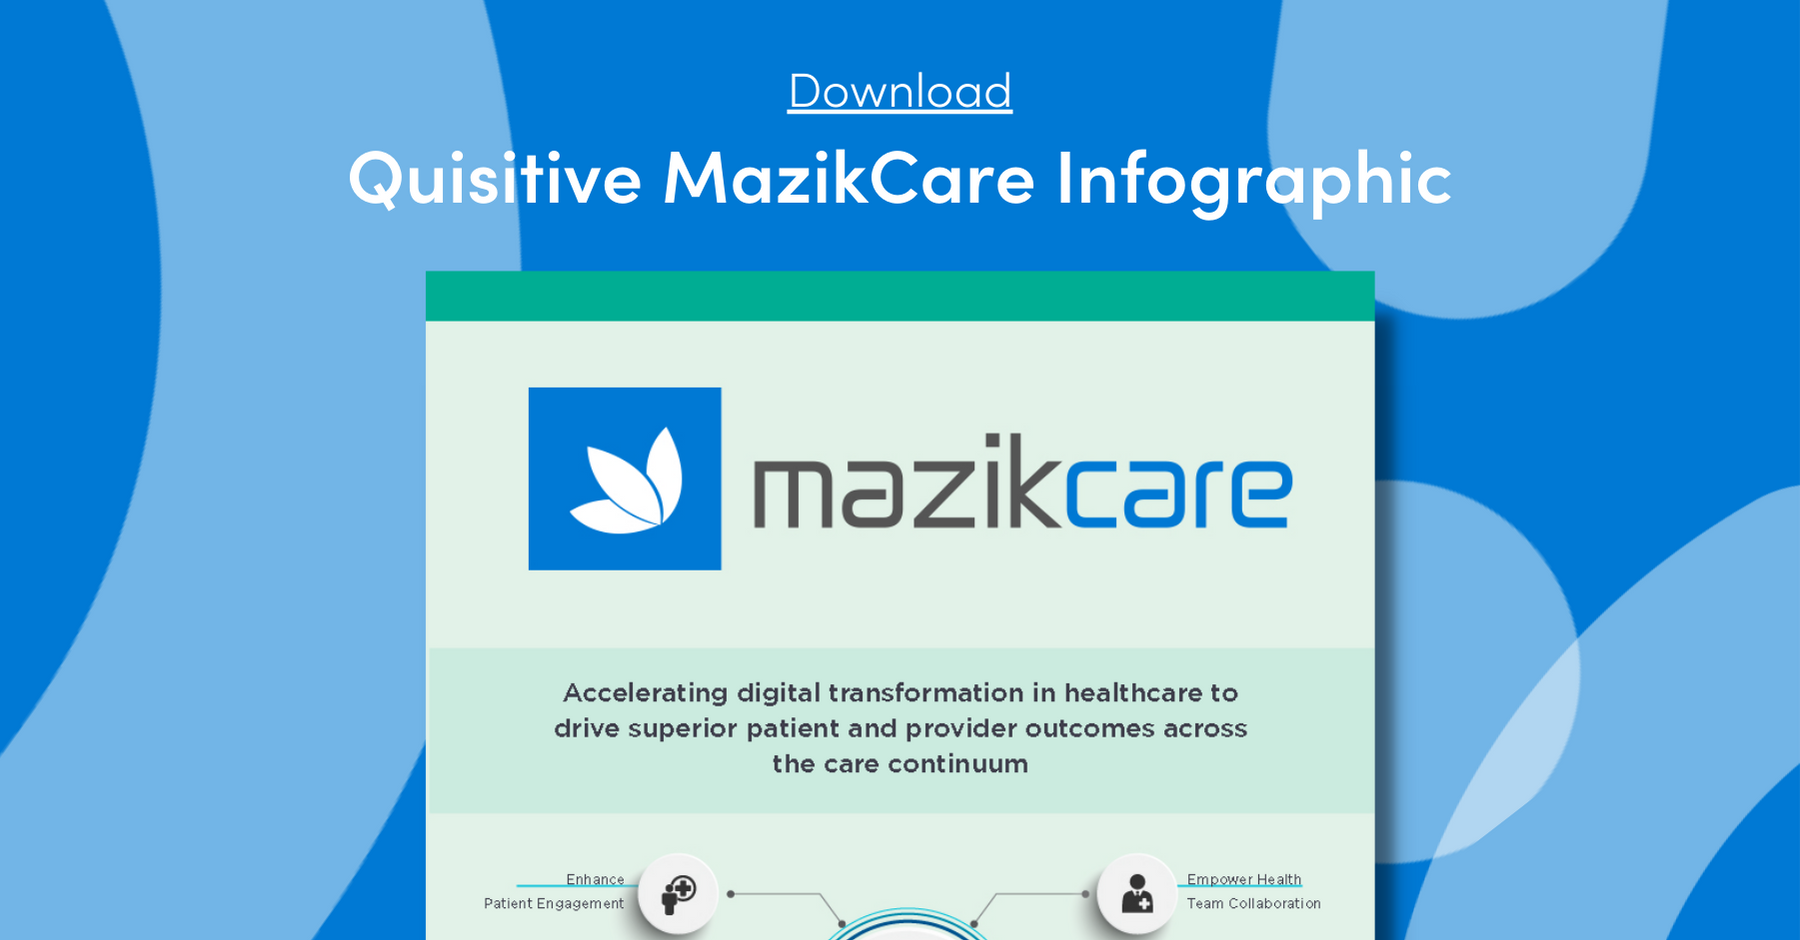 Quisitive MazikCare 2021 Infographic Feature Image